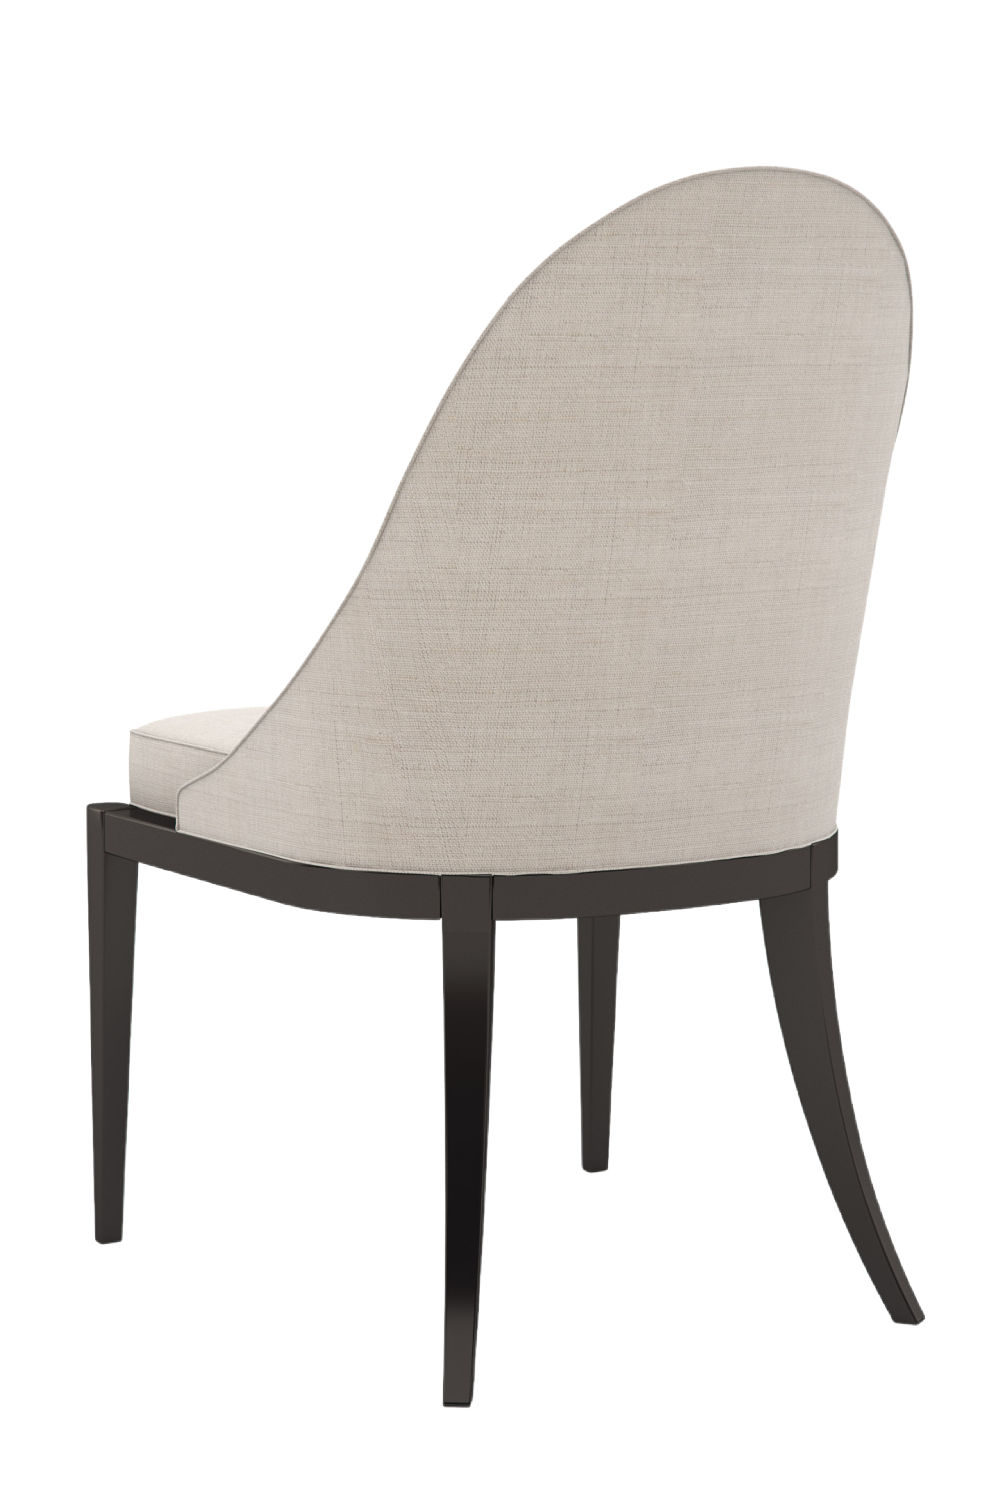 Beige Curved Side Chair | Caracole Natural Choice | Oroa.com